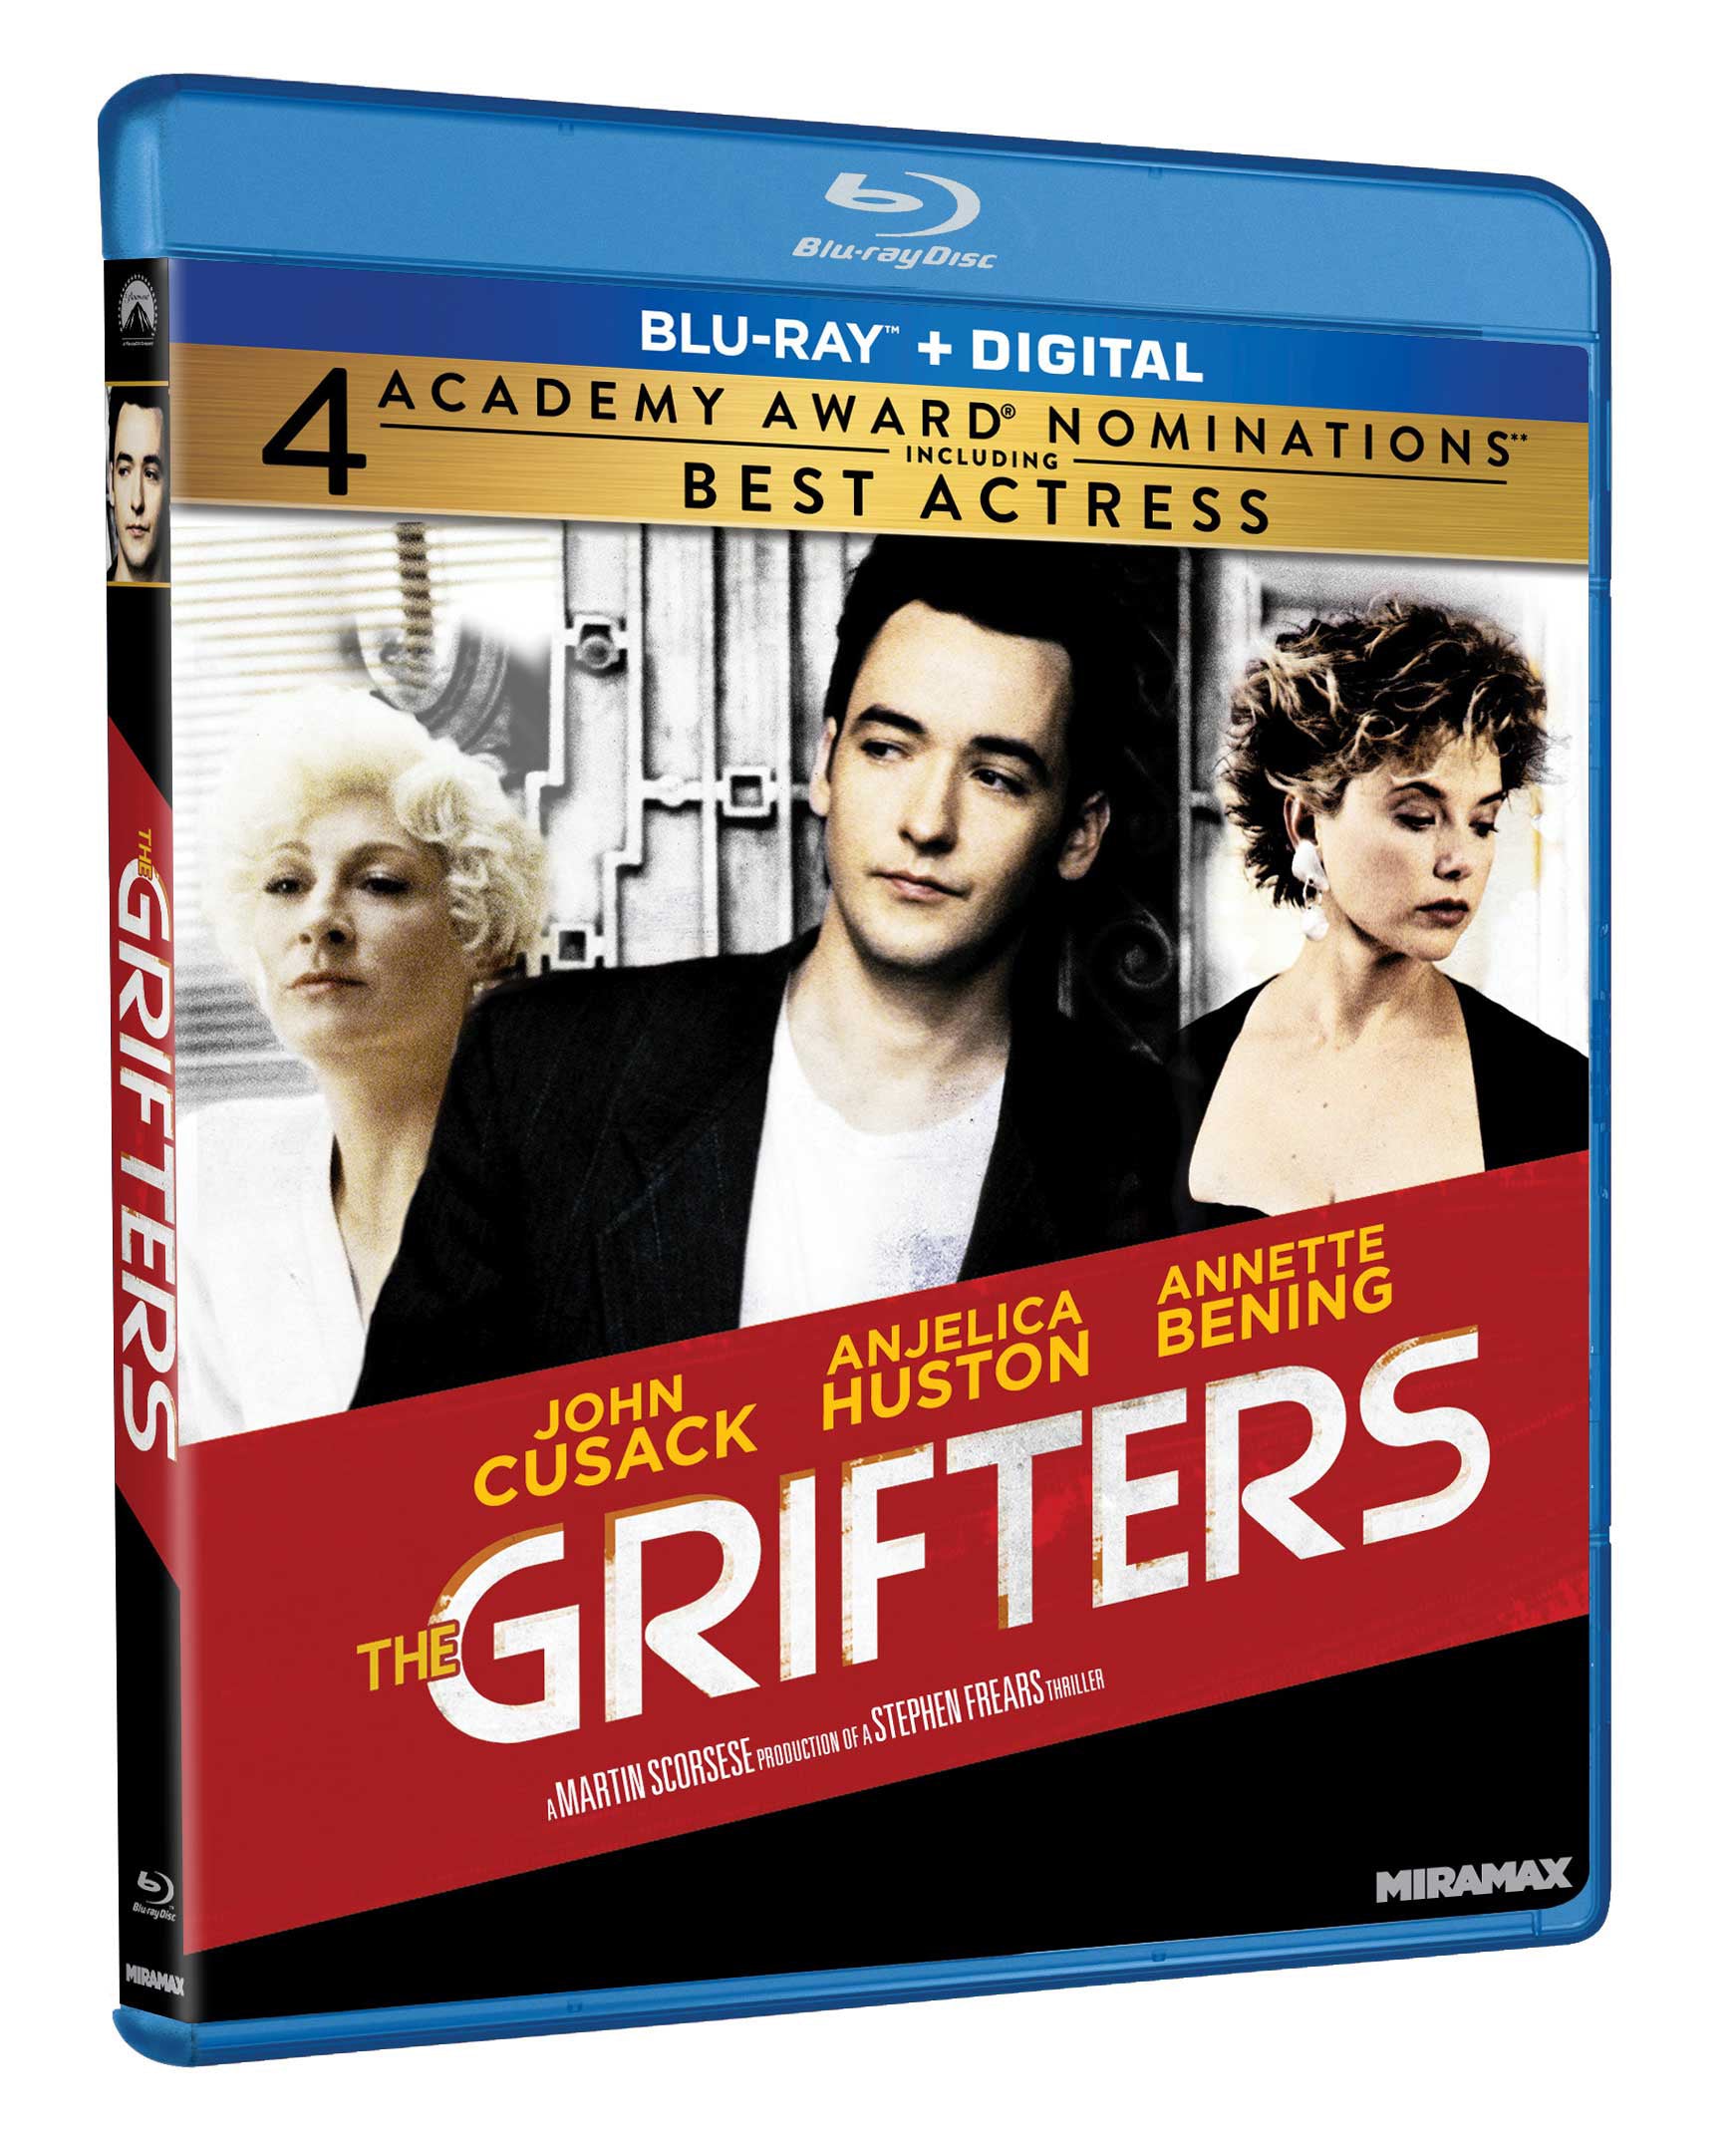 Grifters [Blu-ray] cover art